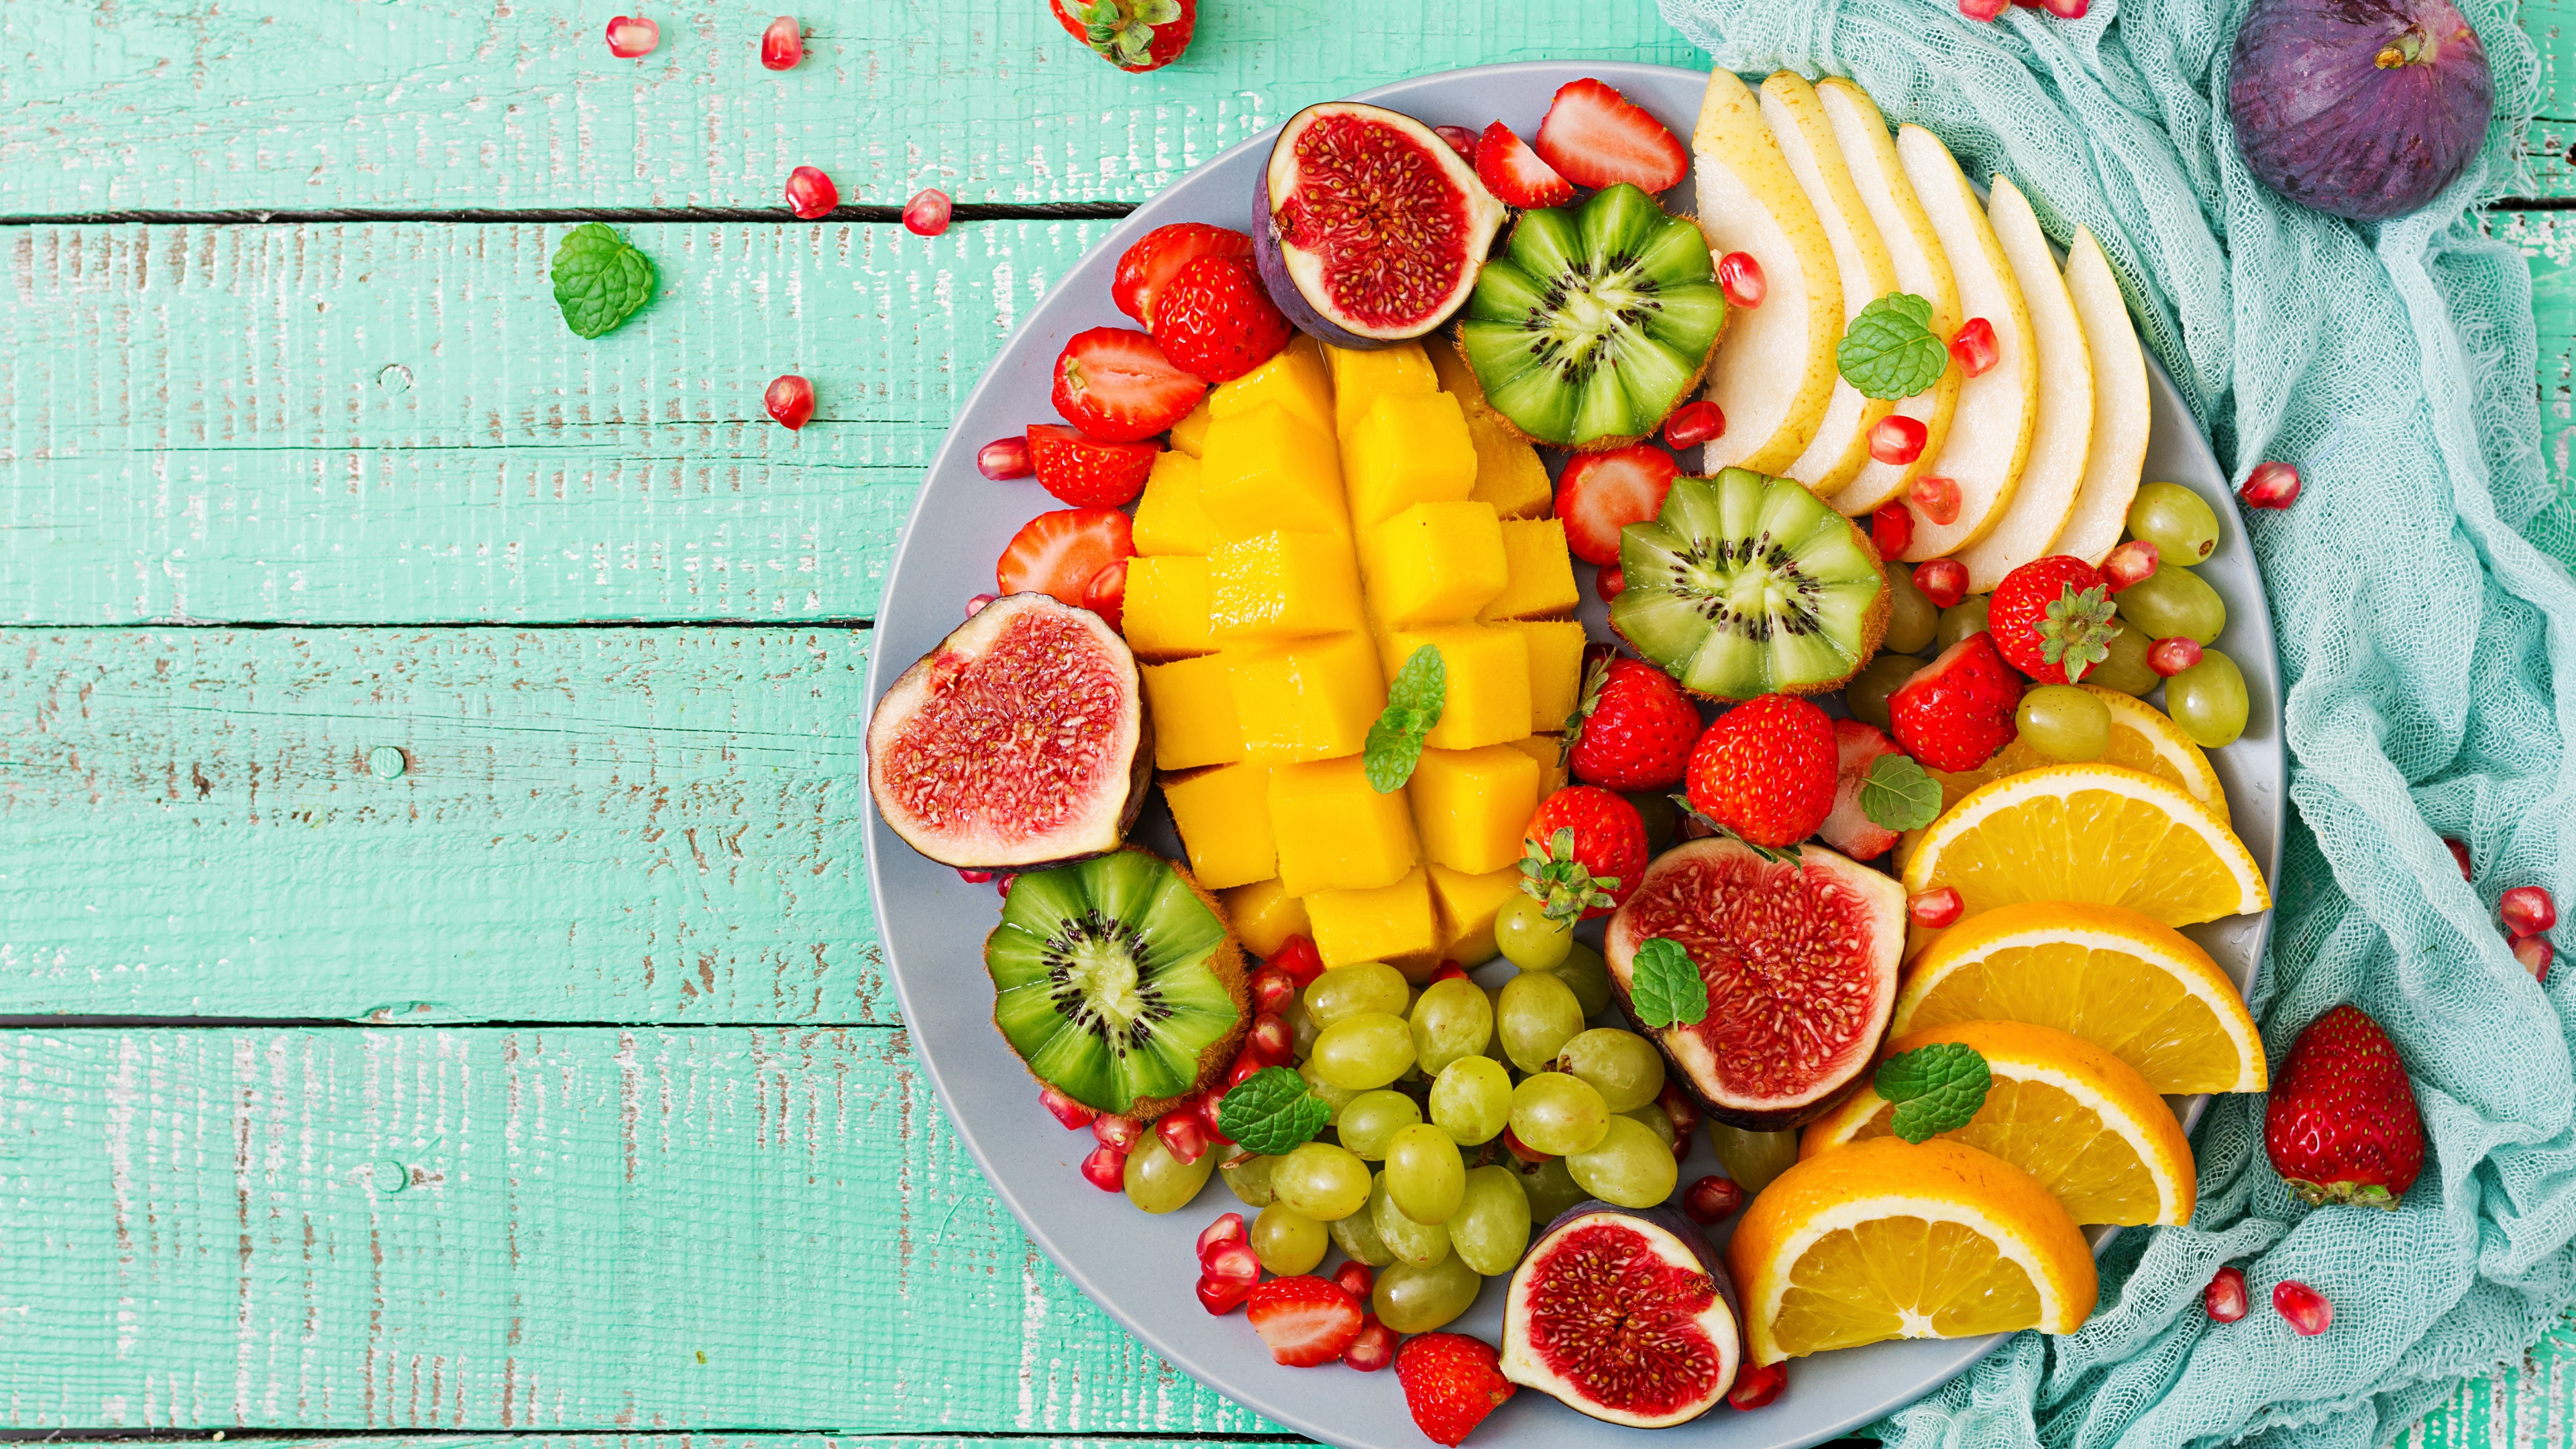 Colorful fruit salad, Fresh and vibrant, Healthy refreshment, Wholesome dish, 3840x2160 4K Desktop